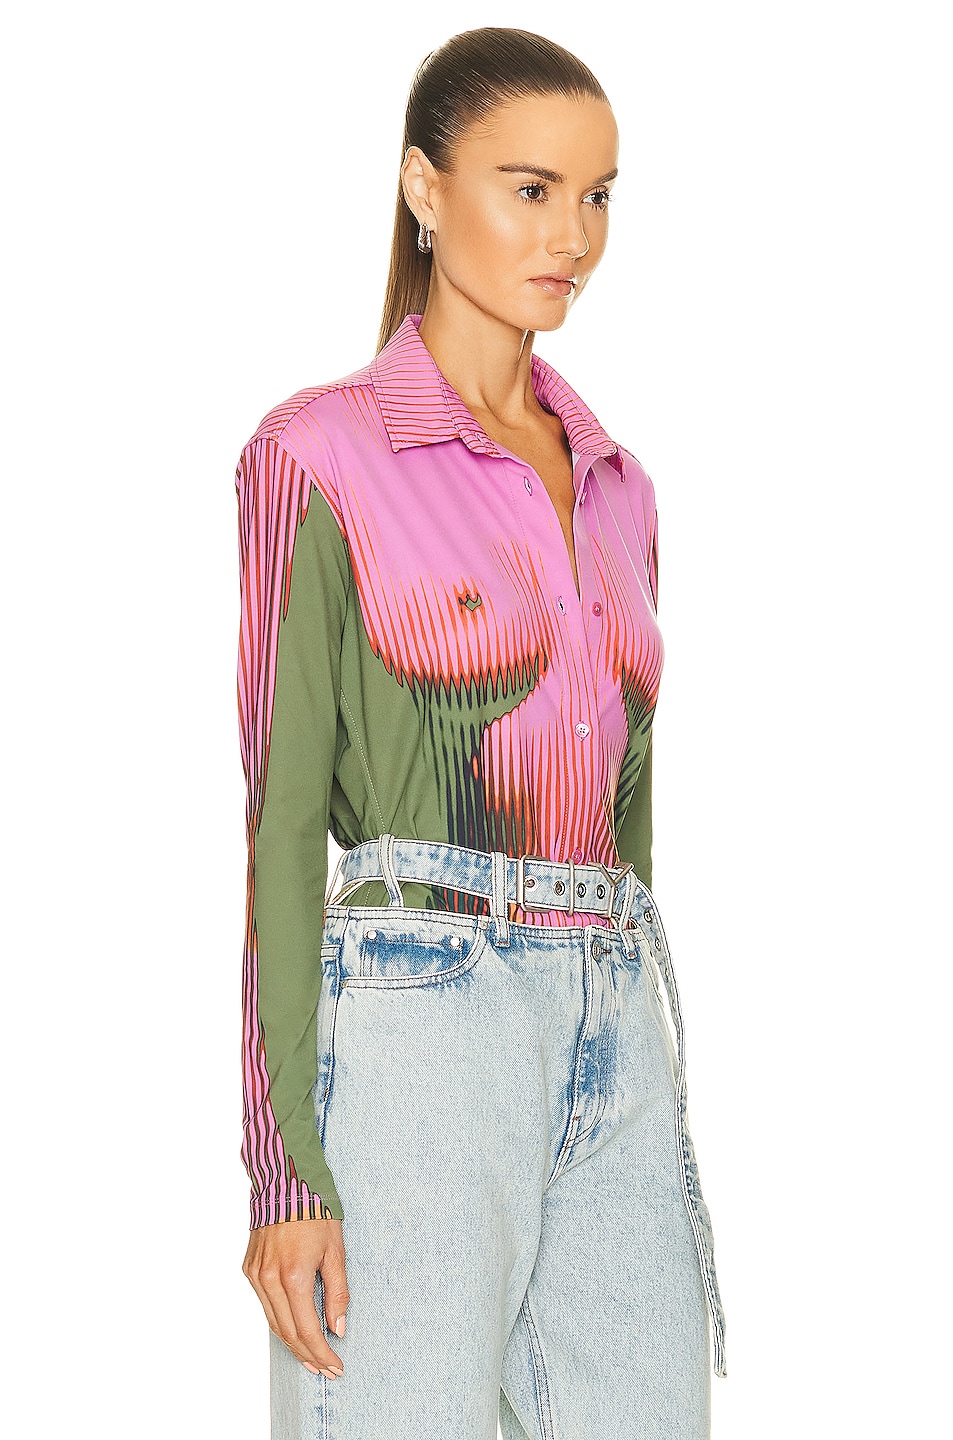 Y/Project x Jean-Paul Gaultier Body Morph Fitted Shirt in Pink & Khaki ...